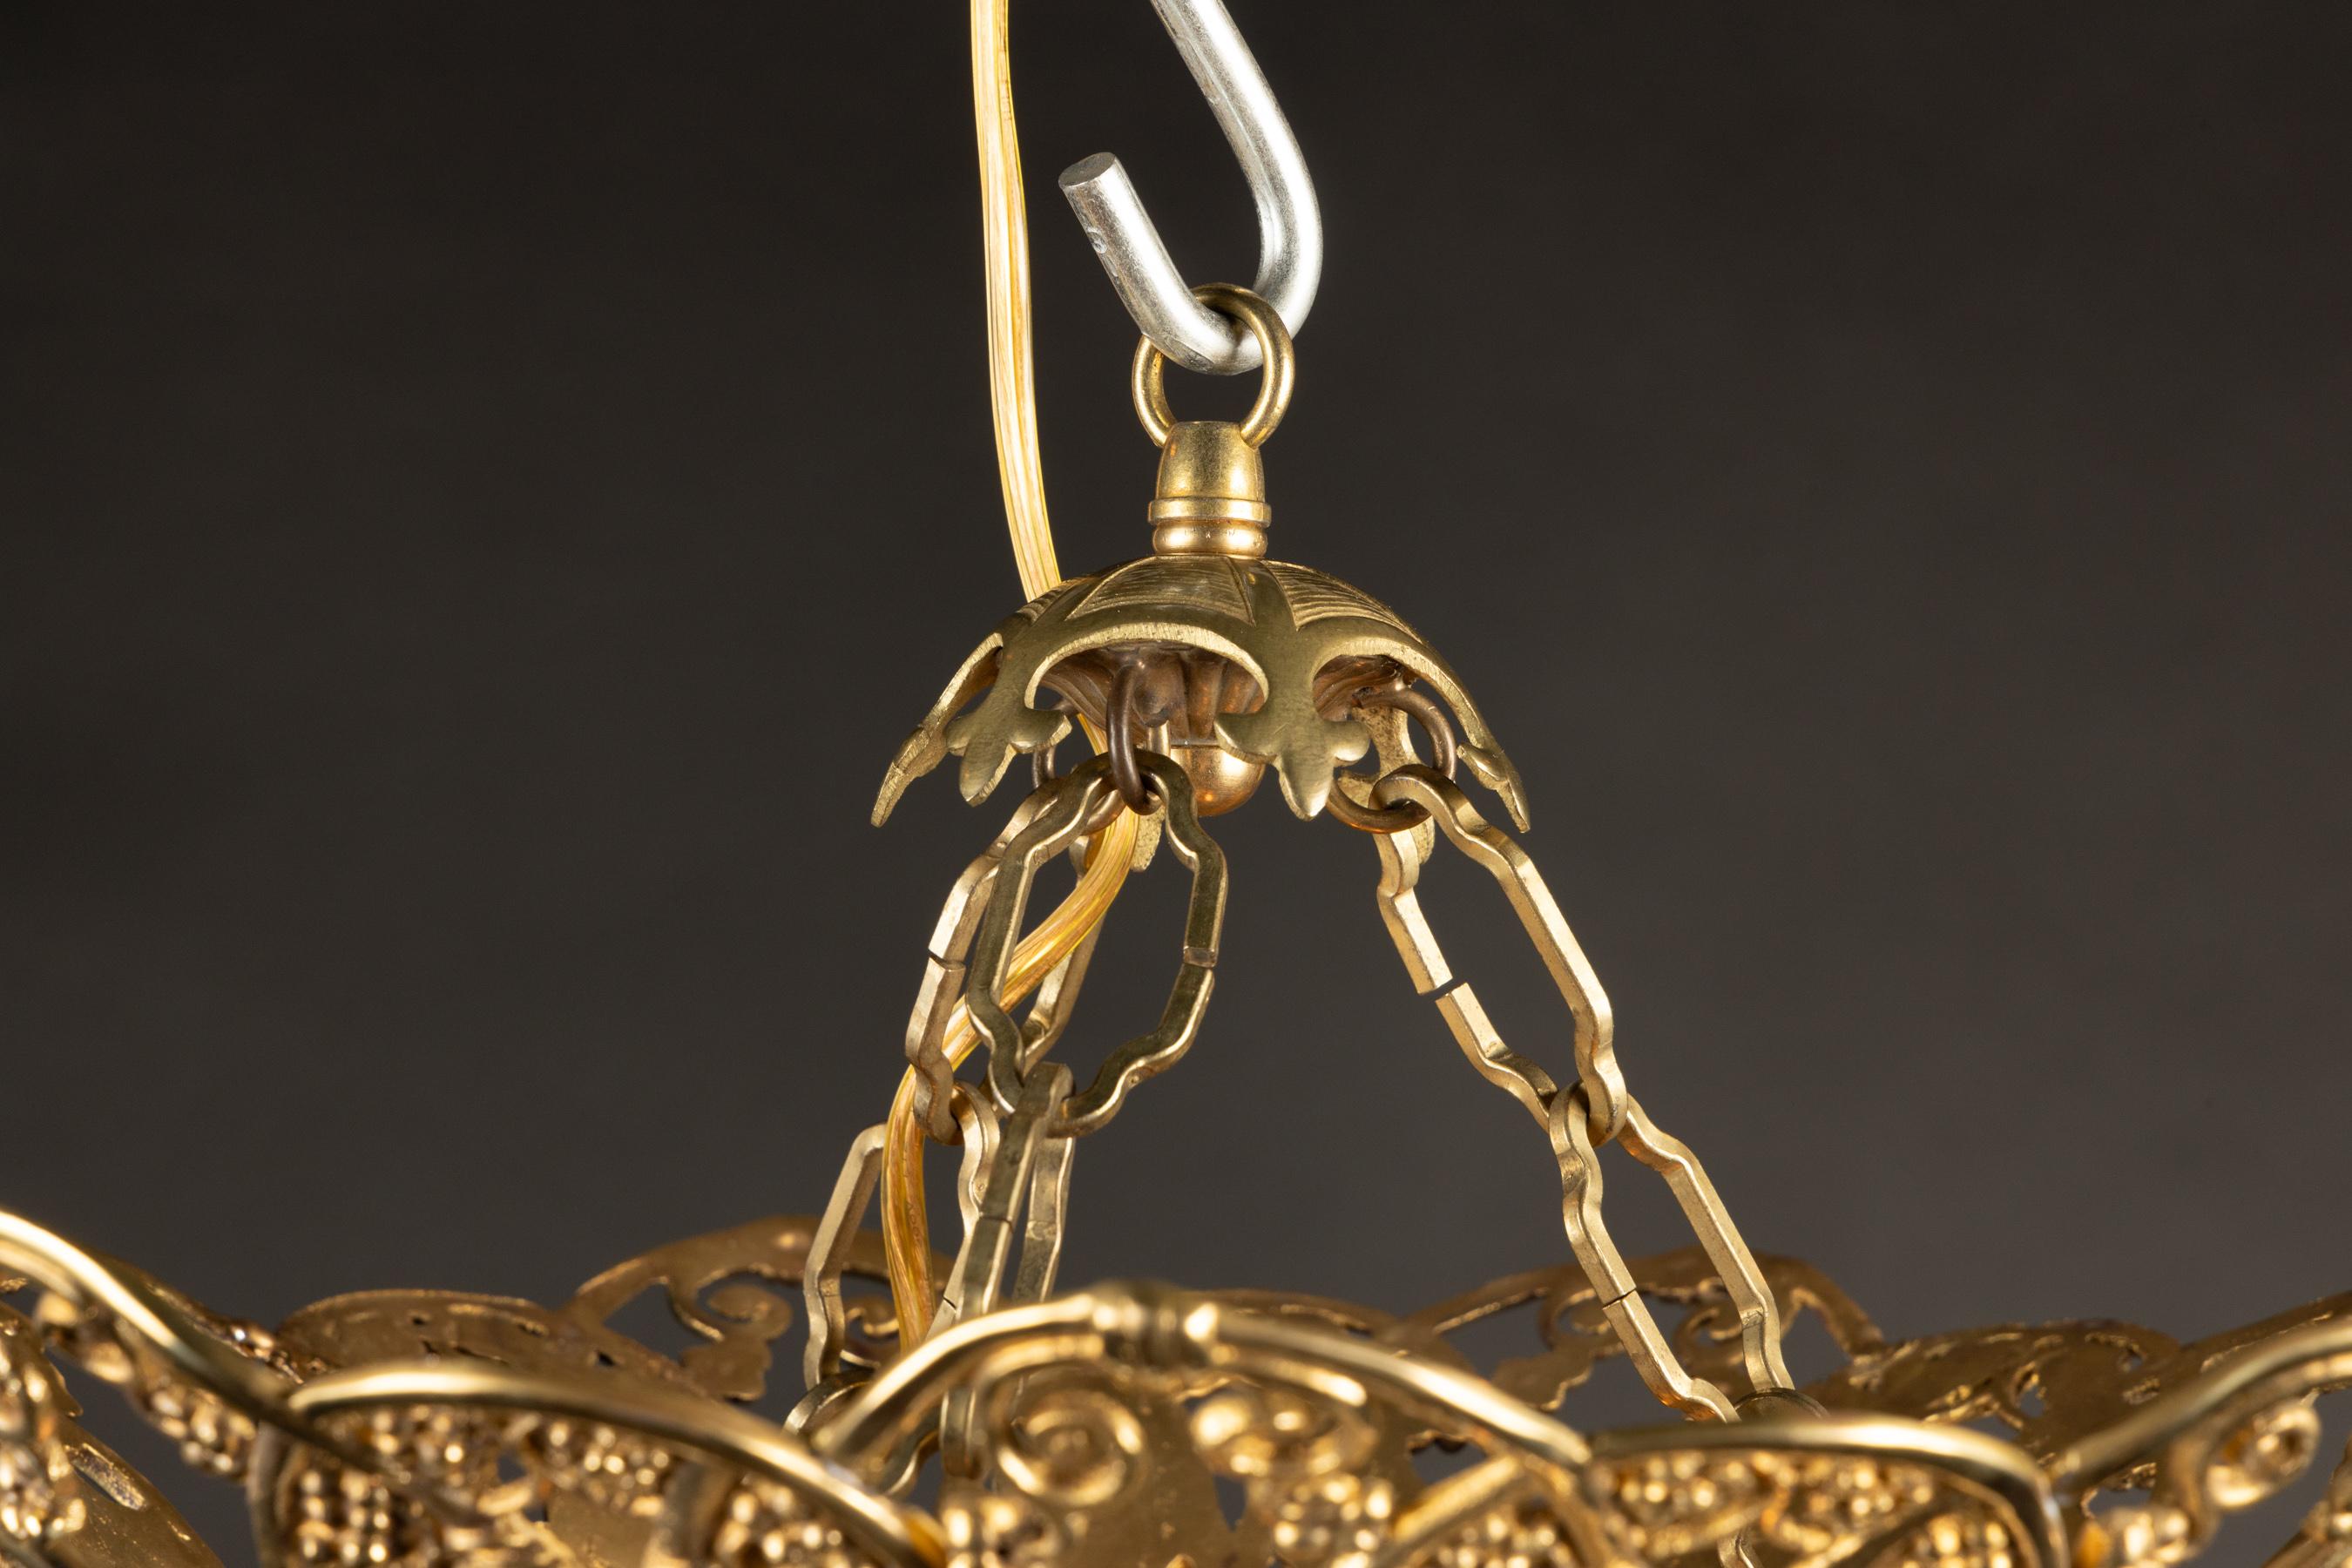 Unique French Bronze and Crystal Chandelier with Grape Motif, Early 20th Century For Sale 3